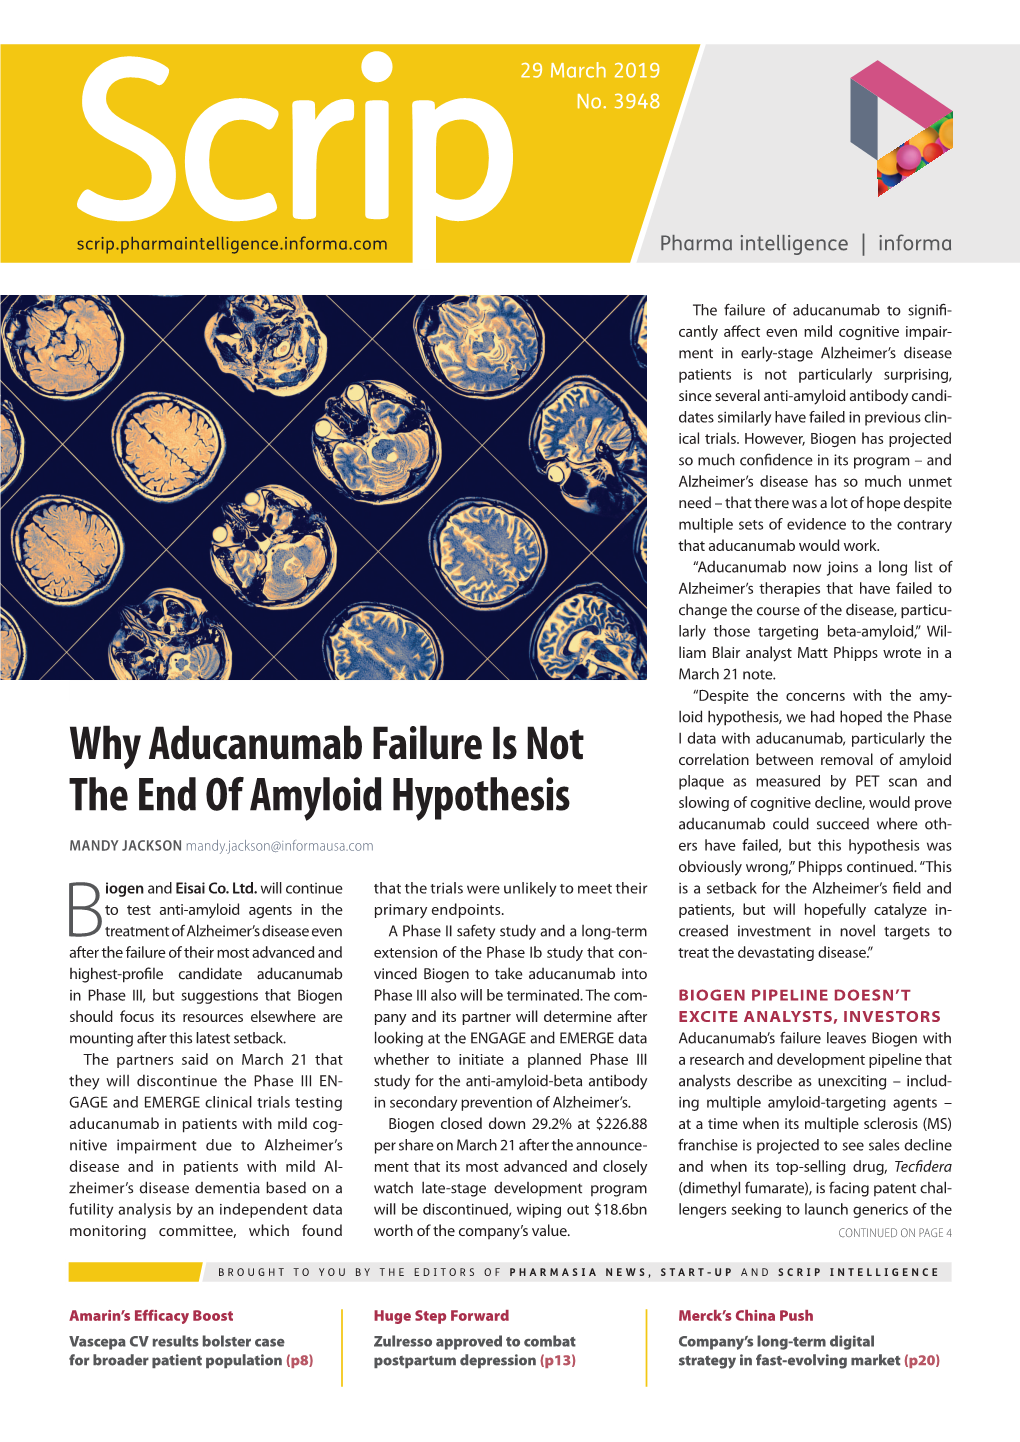 Why Aducanumab Failure Is Not the End of Amyloid Hypothesis